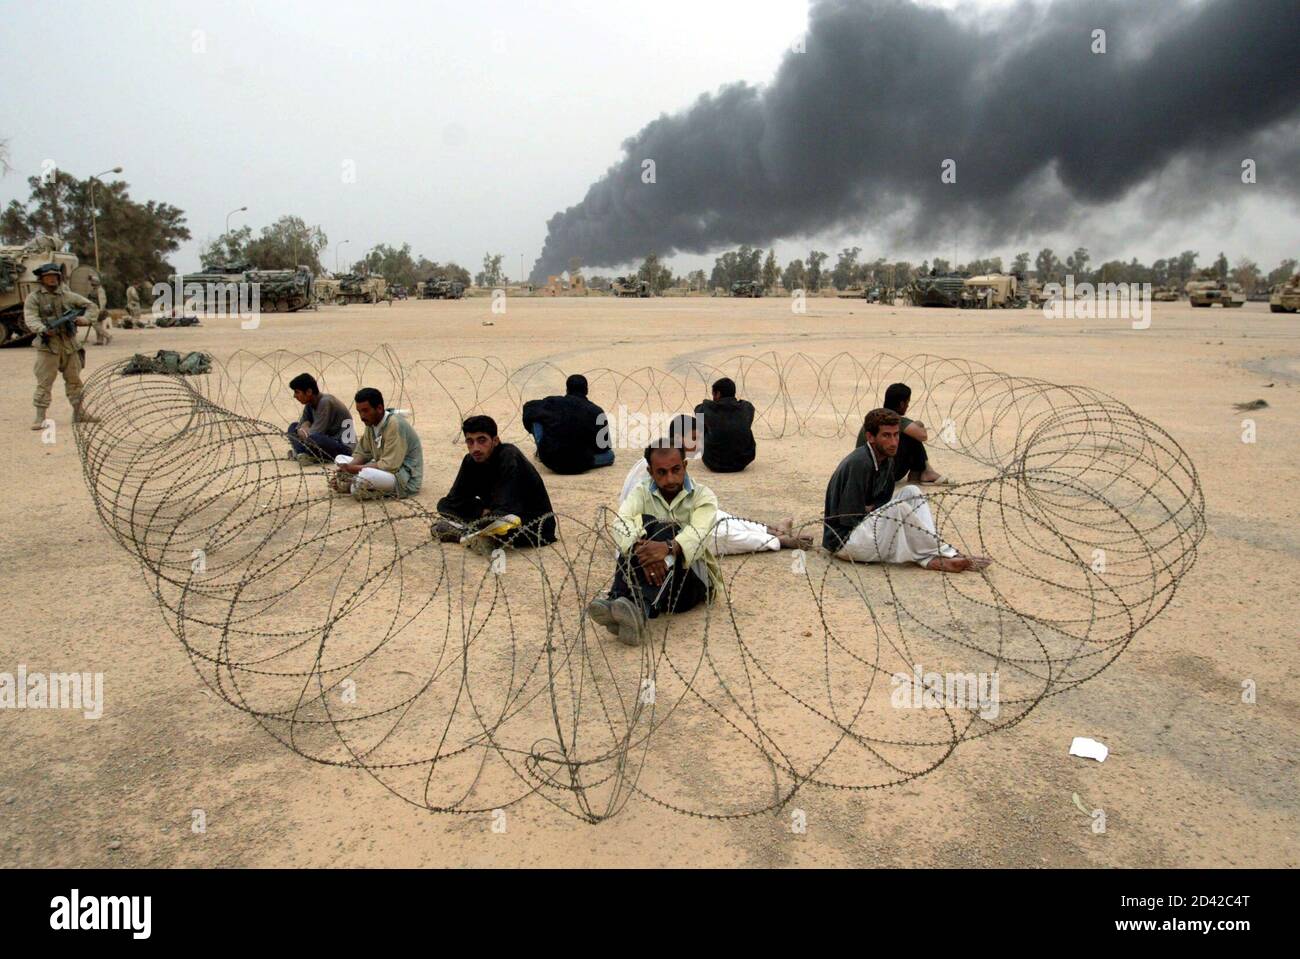 Members of the Iraqi Republican guard, dressed in civilian clothes, sit behind barbed wire at an abandoned Iraqi military base under the control of U.S. Marines in the suburbs of the Iraqi capital Baghdad on April 8, 2003.  U.S. Marines attacked a military airfield on the southeastern outskirts of Baghdad on Tuesday, as U.S. forces tried to tighten their noose around the Iraqi capital, a Reuters correspondent said. Military sources said the Marines would gradually push forward towards the city centre. Stock Photo